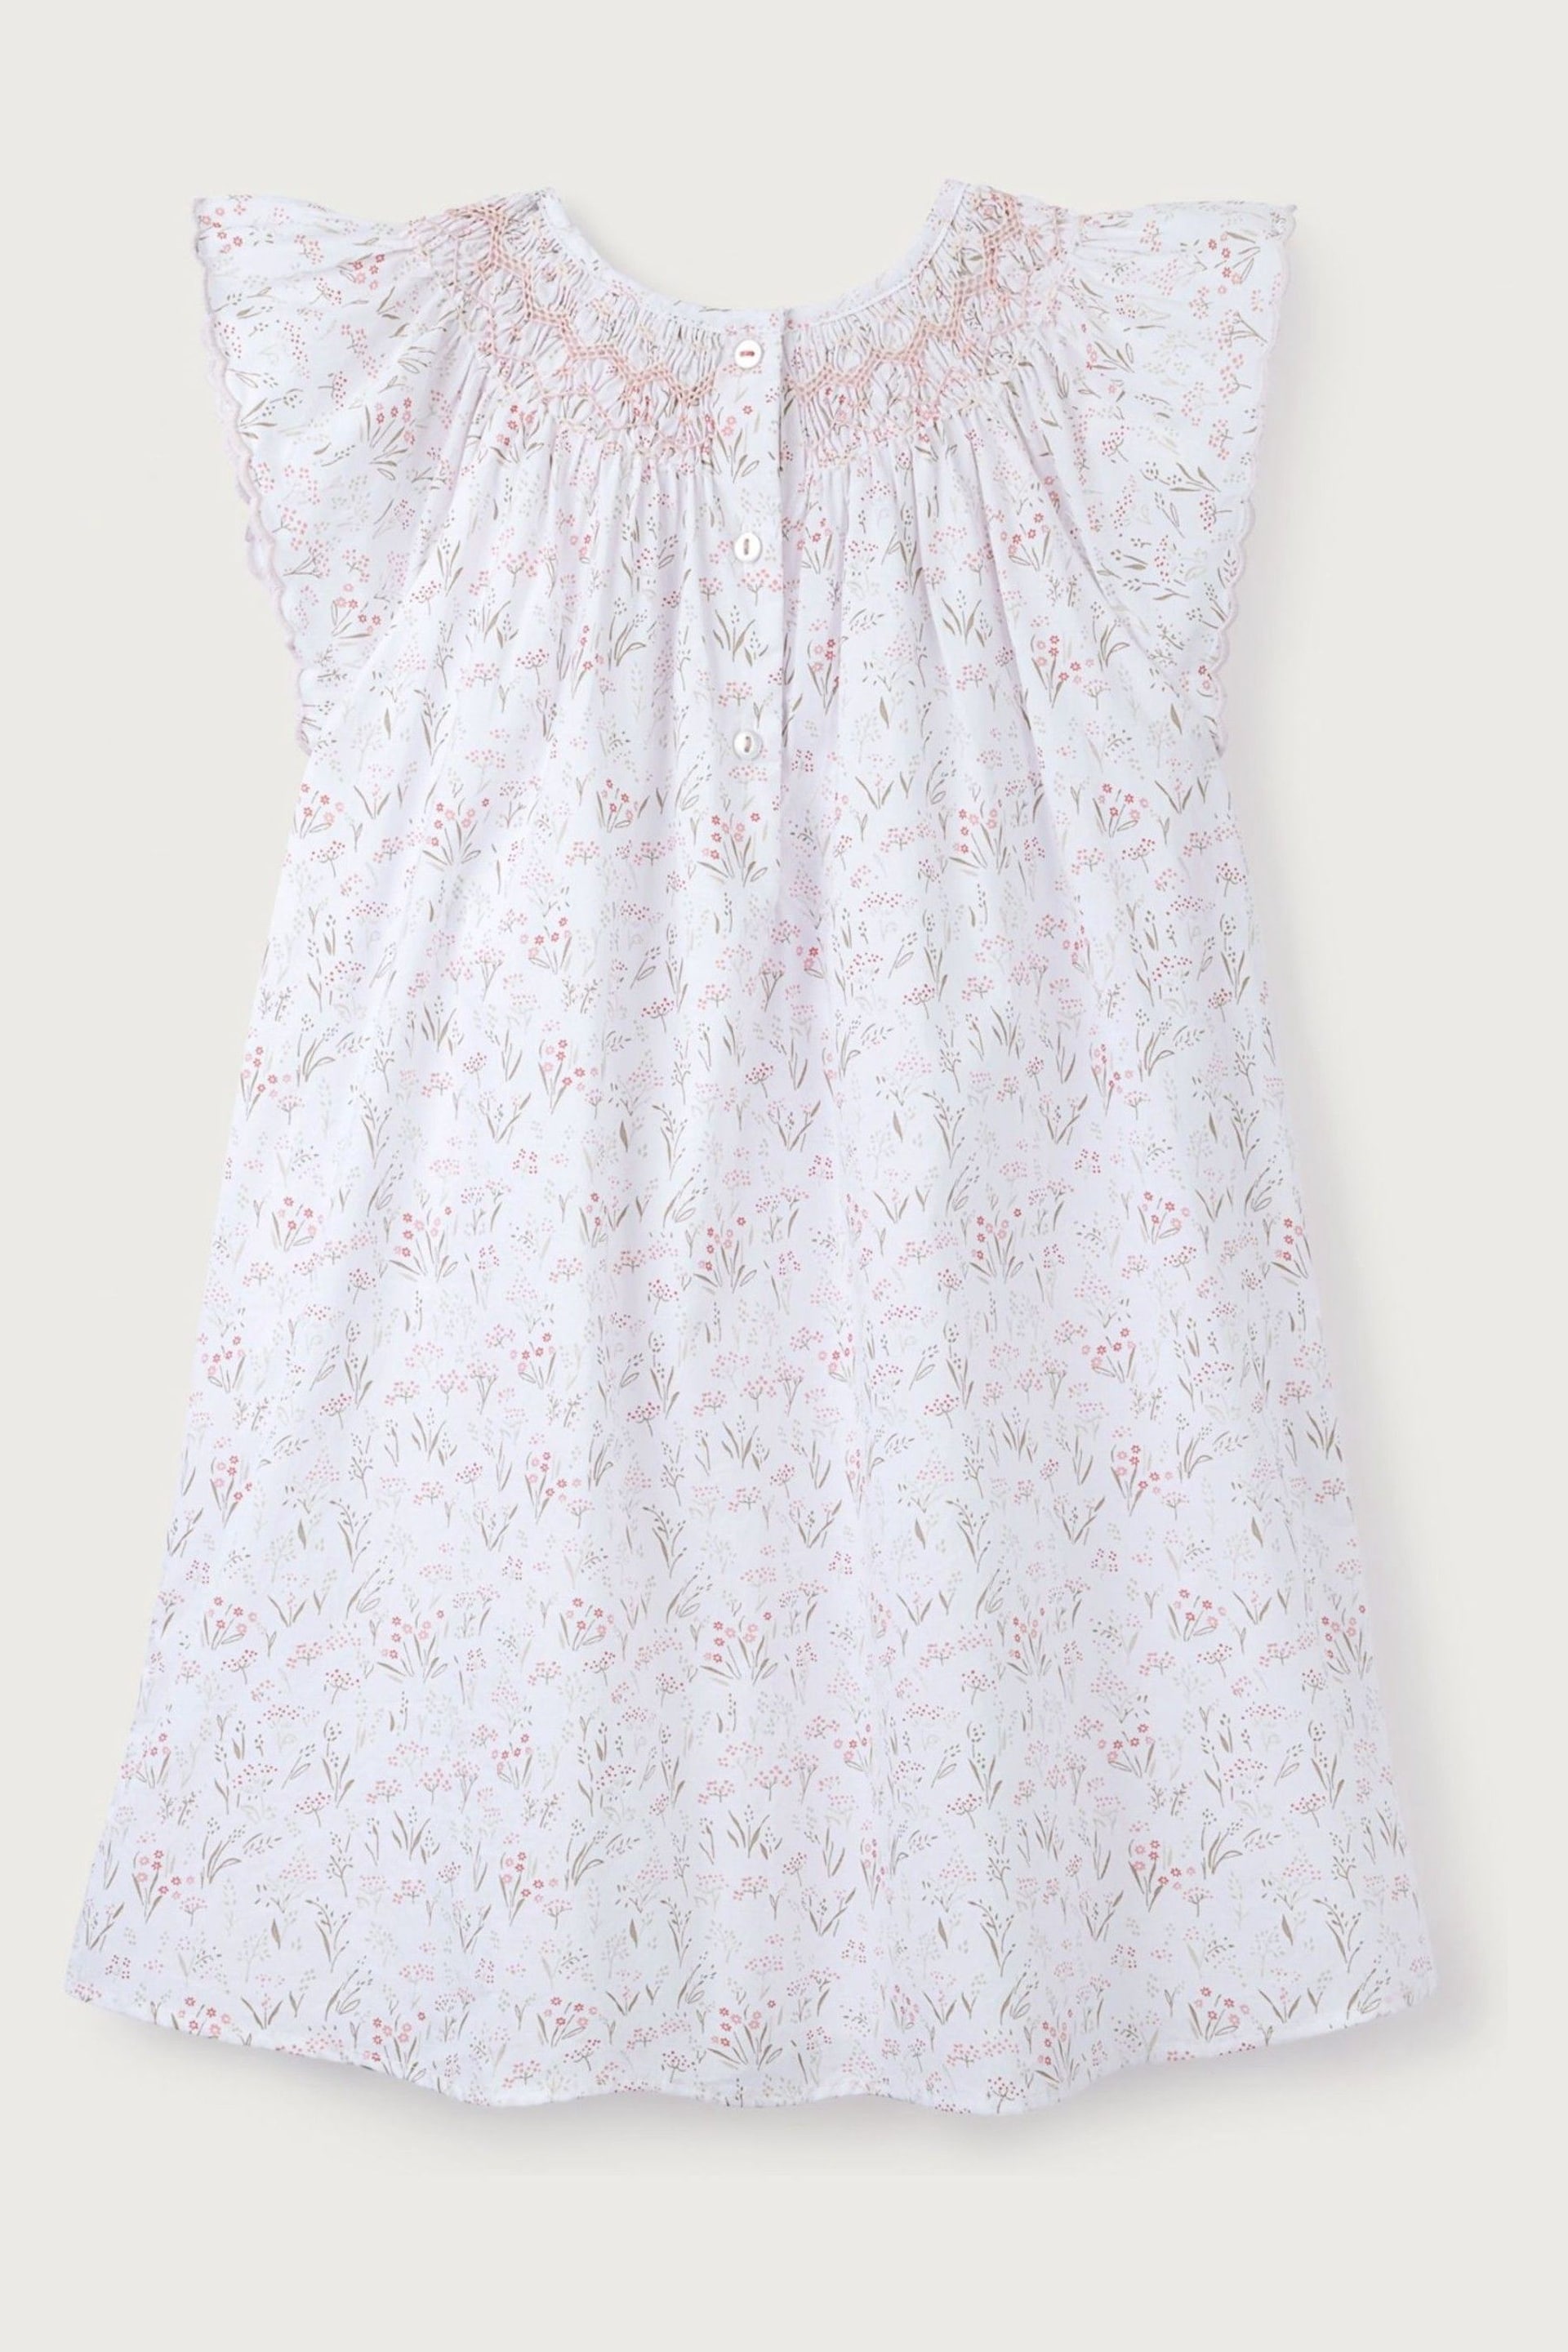 The White Company Celine Cotton Hand Smocked Frill Sleeve White Dress - Image 11 of 12